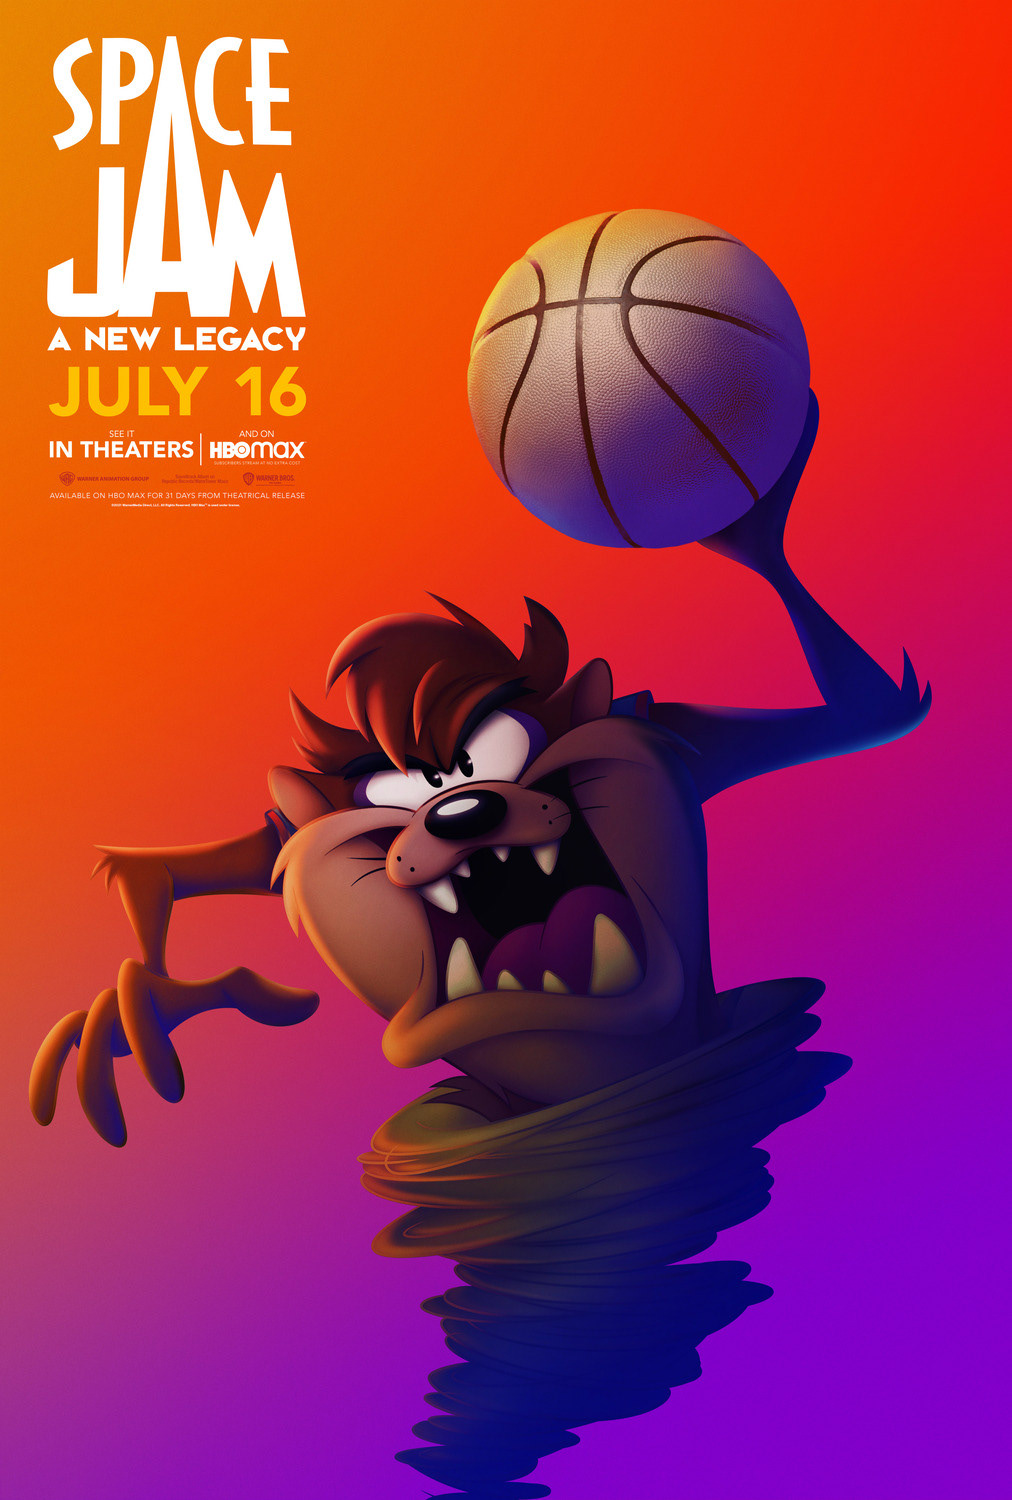 A new Legacy cartoon lebon james LeBron looney tunes movie poster poster Space Jam Tunes